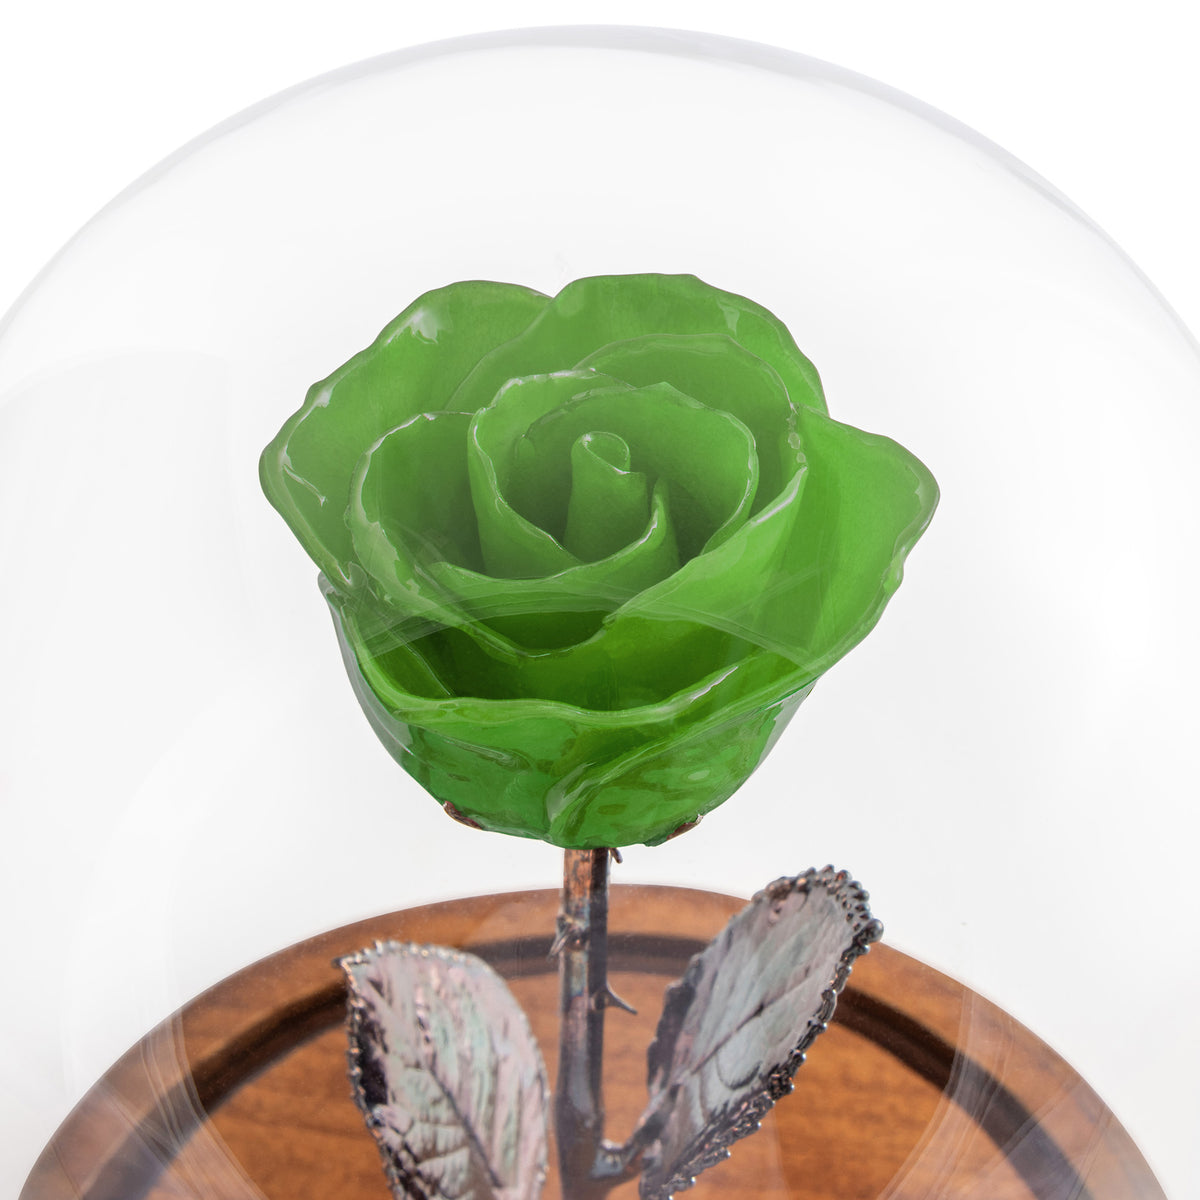 Green Enchanted Rose (aka Beauty &amp; The Beast Rose) with Patina Copper Stem Mounted to A Hand Turned Solid Wood Base under a glass dome. Close up view.